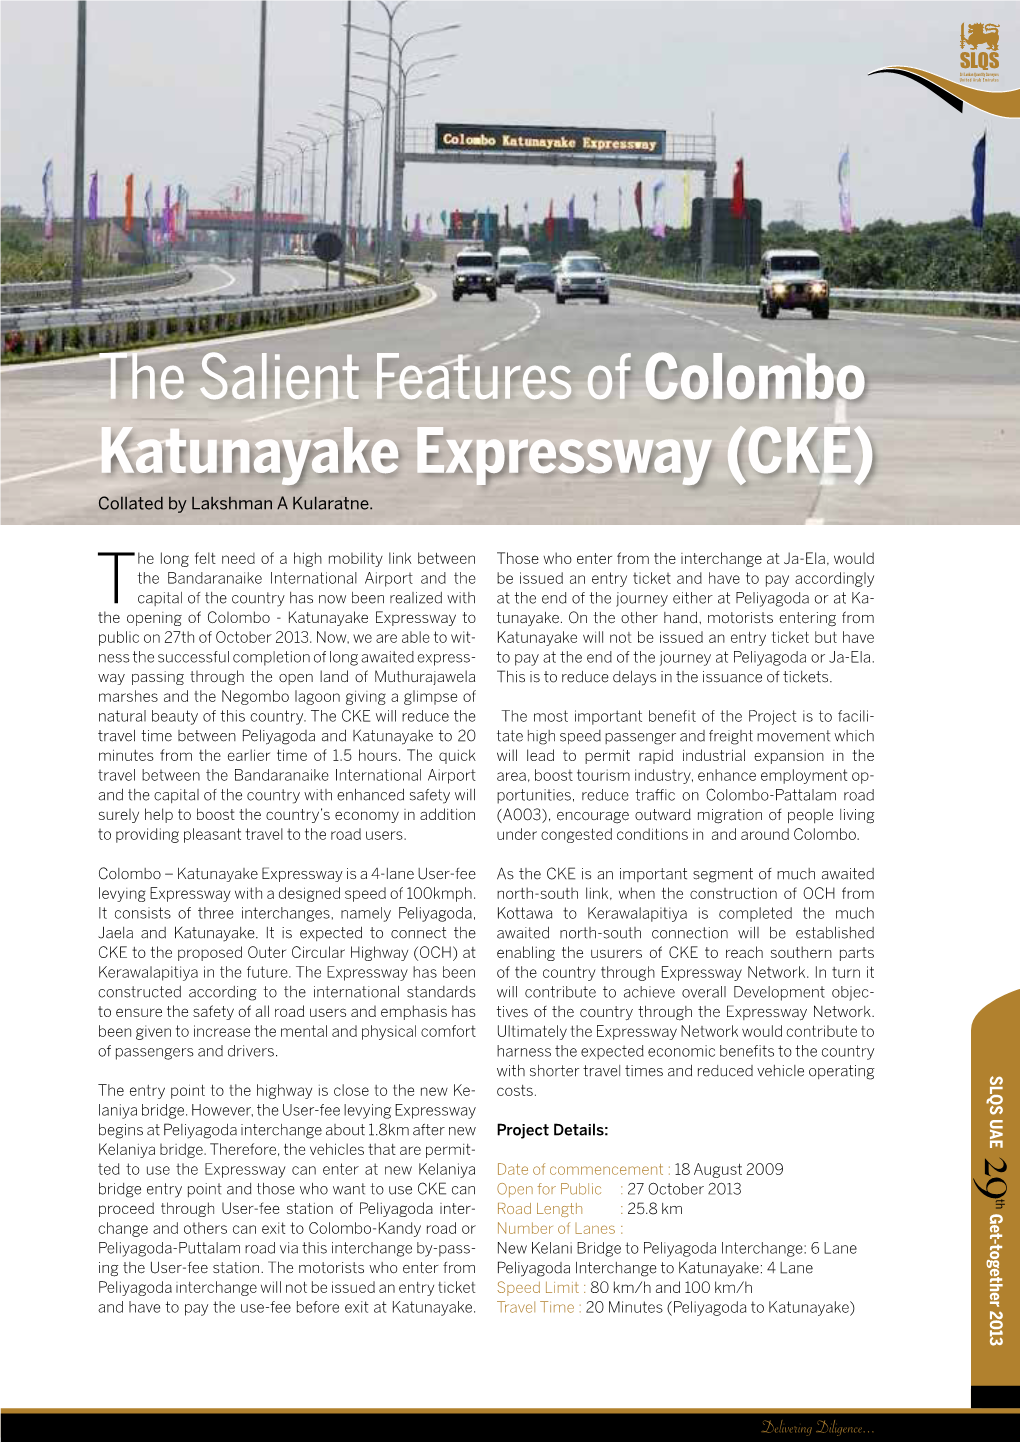 The Salient Features of Colombo Katunayake Expressway (CKE) Collated by Lakshman a Kularatne